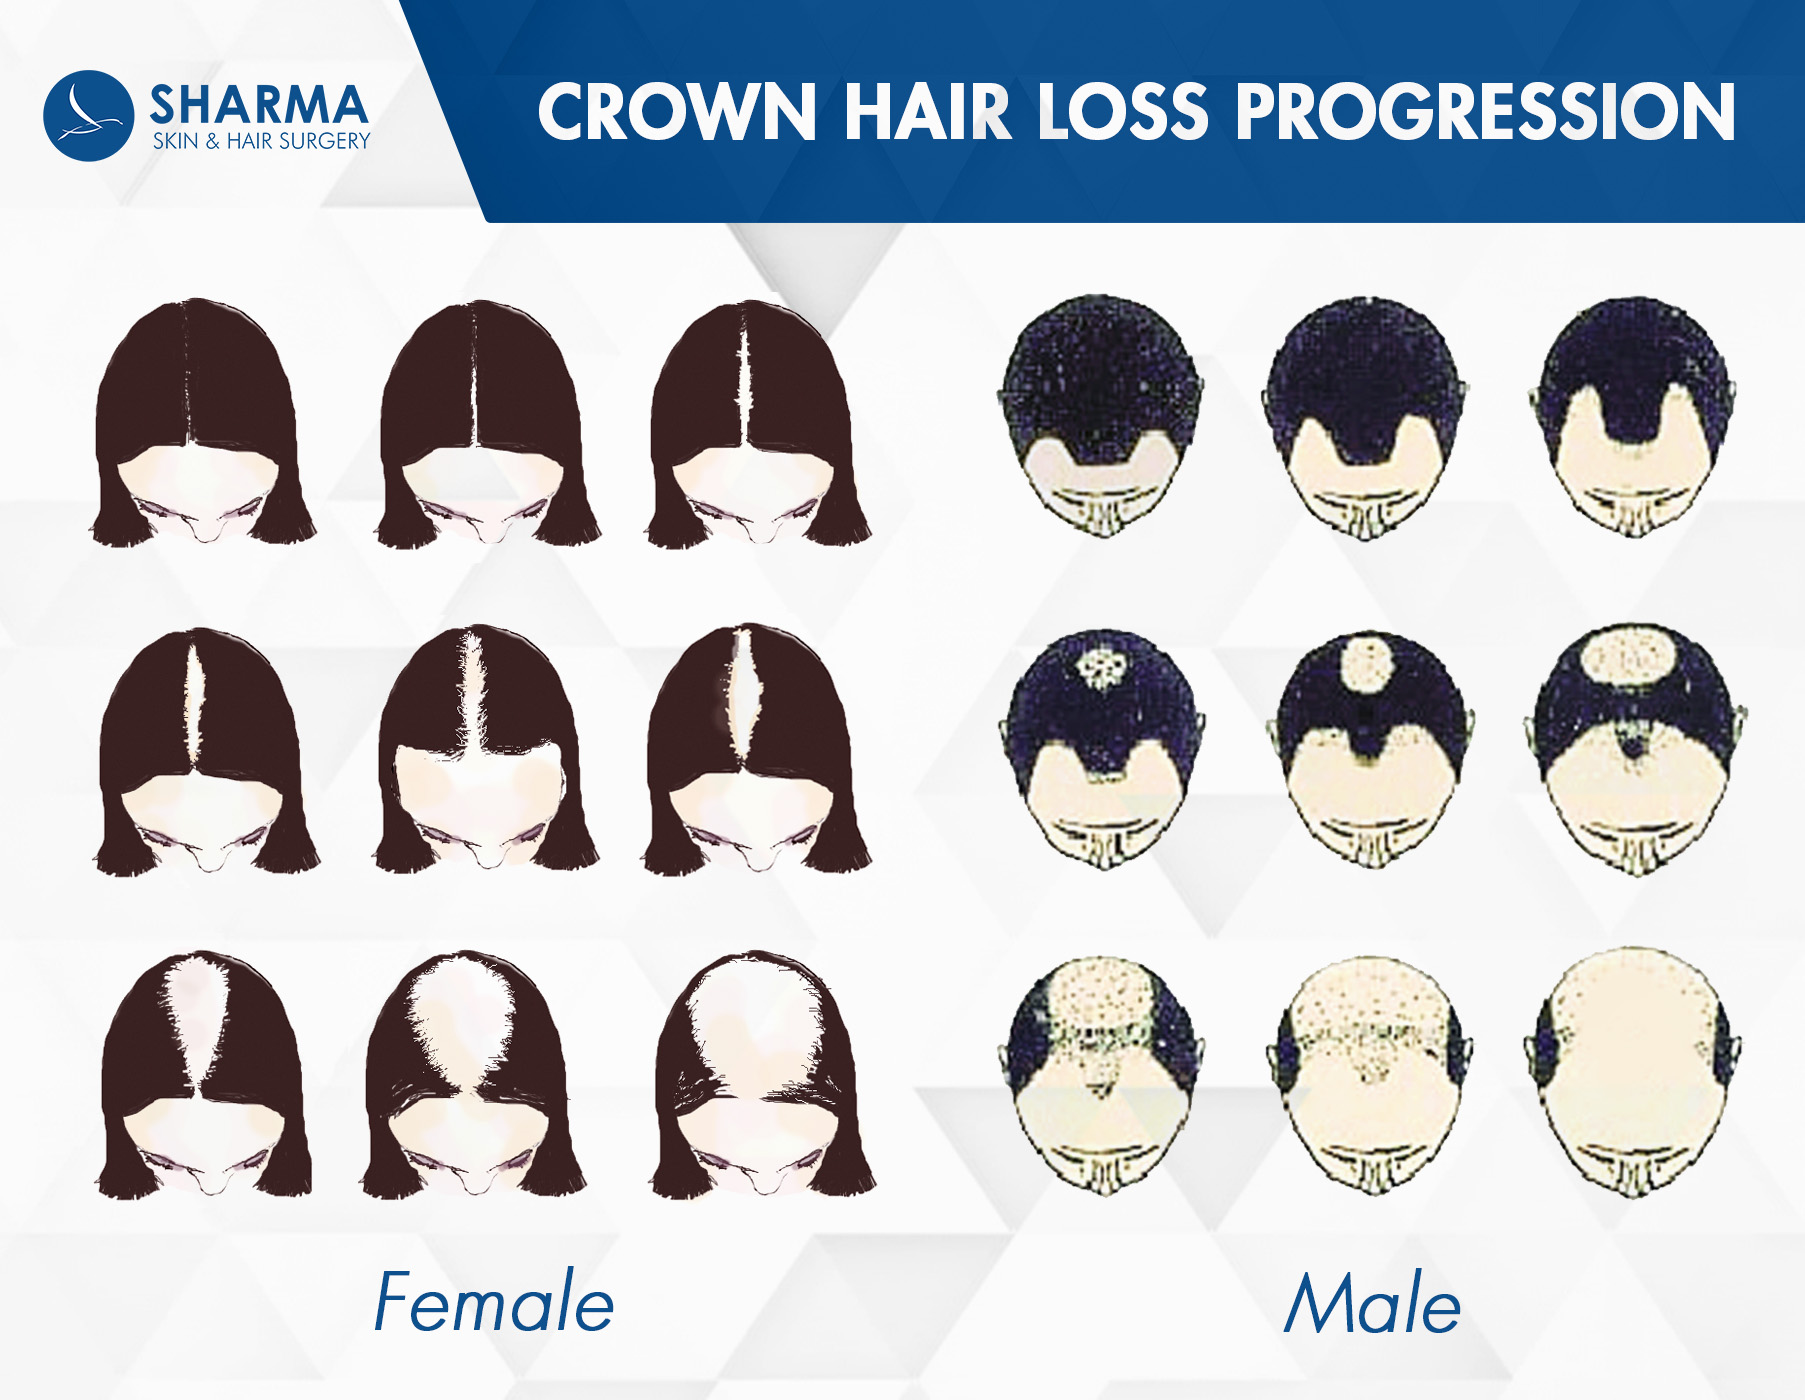 Female and male hair loss progression at the crown located at the top of the head 2